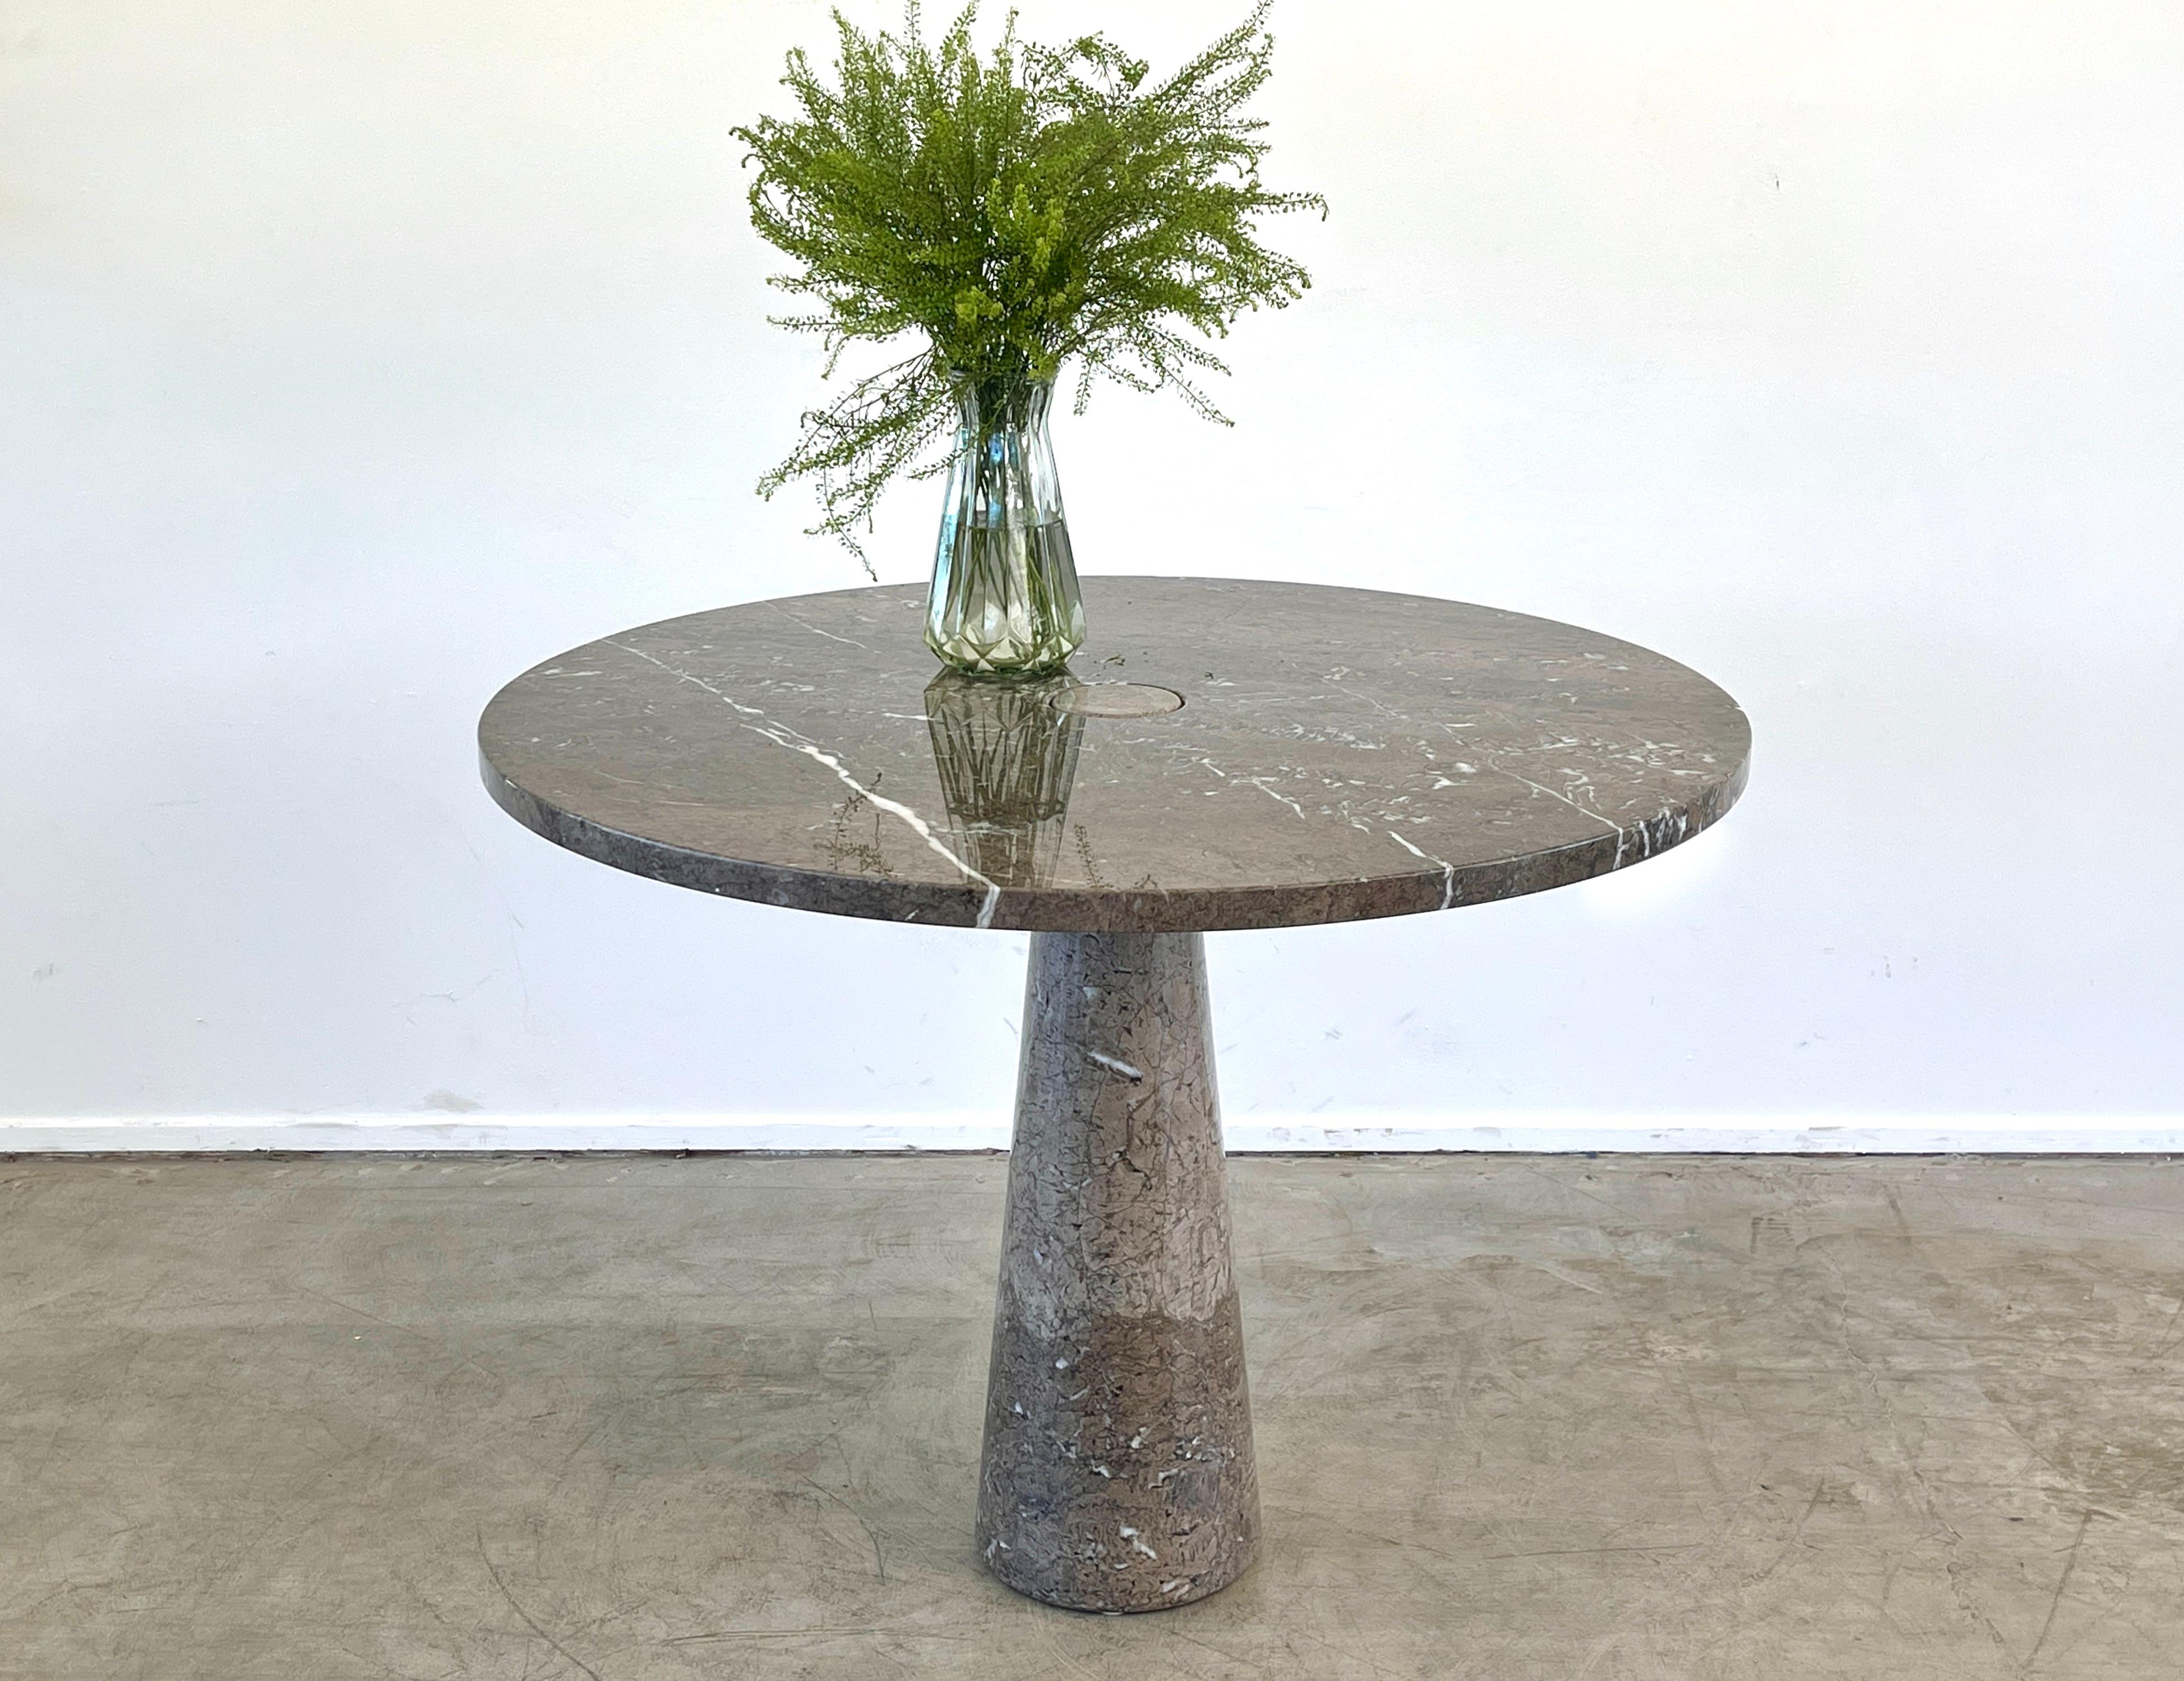 Dining Table Designed by Angelo Mangiarotti for Skipper - Eros series.

Beautiful grey Mondragone marble on pedestal base. Polished marble.

Rare color - and wonderful as a center table or dining nook.